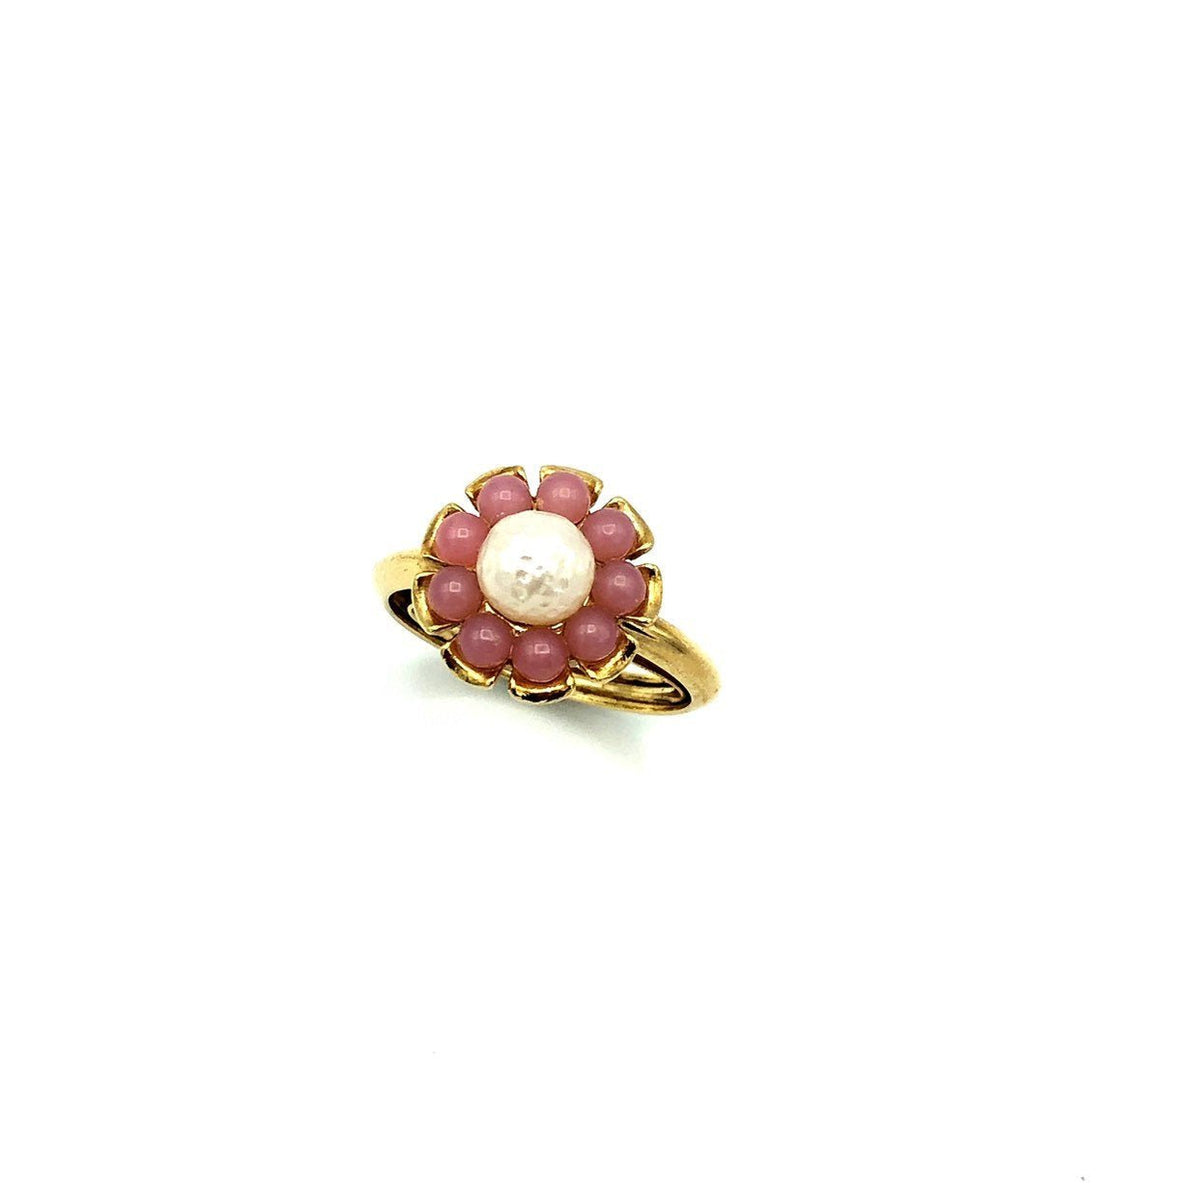 Avon Pearl & Pink Flower Vintage Cocktail Ring - 24 Wishes Vintage Jewelry